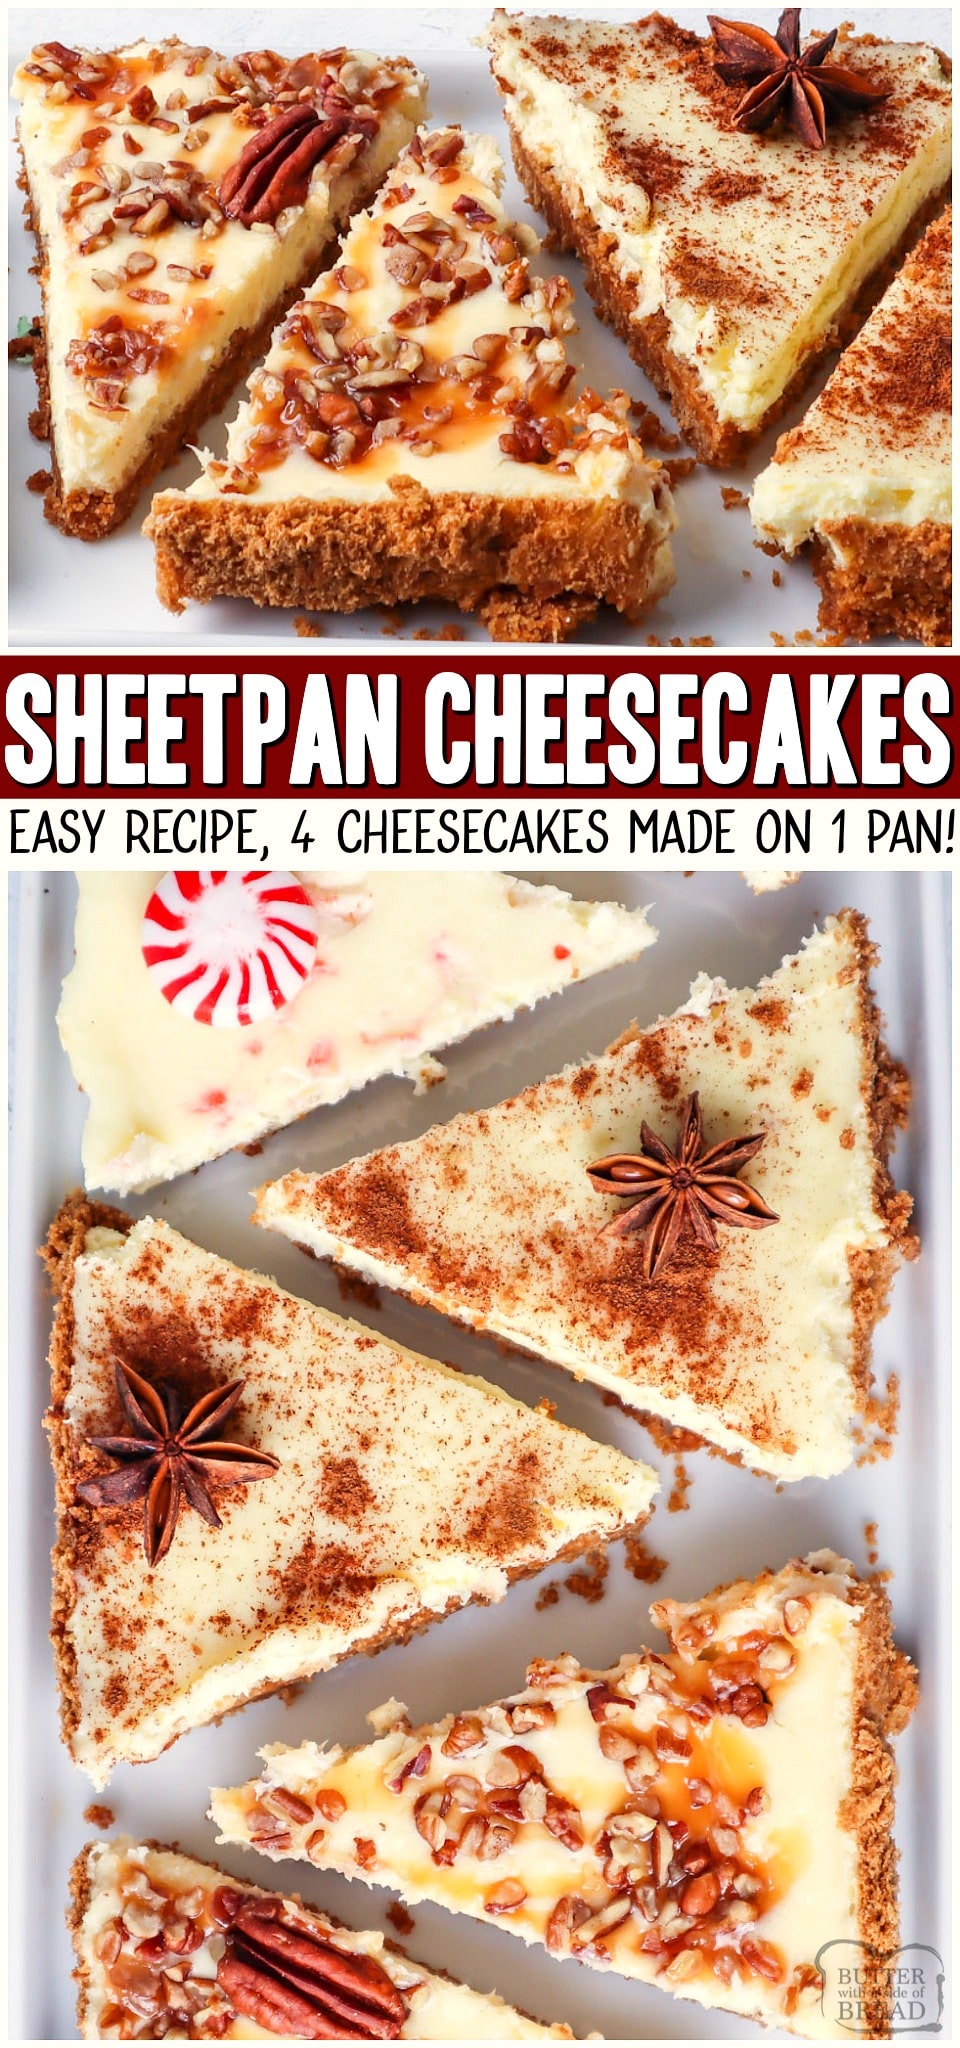 This easy sheet pan cheesecake recipe is one to remember. With just one simple graham cracker crust and a basic cheesecake batter we can create holiday cheesecake bars with 4 flavor options to choose from! 

1 sheet pan and 4 delicious flavors of homemade cheesecake made conveniently on a sheet pan. Serve it up at your next holiday party and watch them disappear! #cheesecake #sheetpan #easyrecipe #dessert #holidays #Christmas #cheesecake #recipe from BUTTER WITH A SIDE OF BREAD